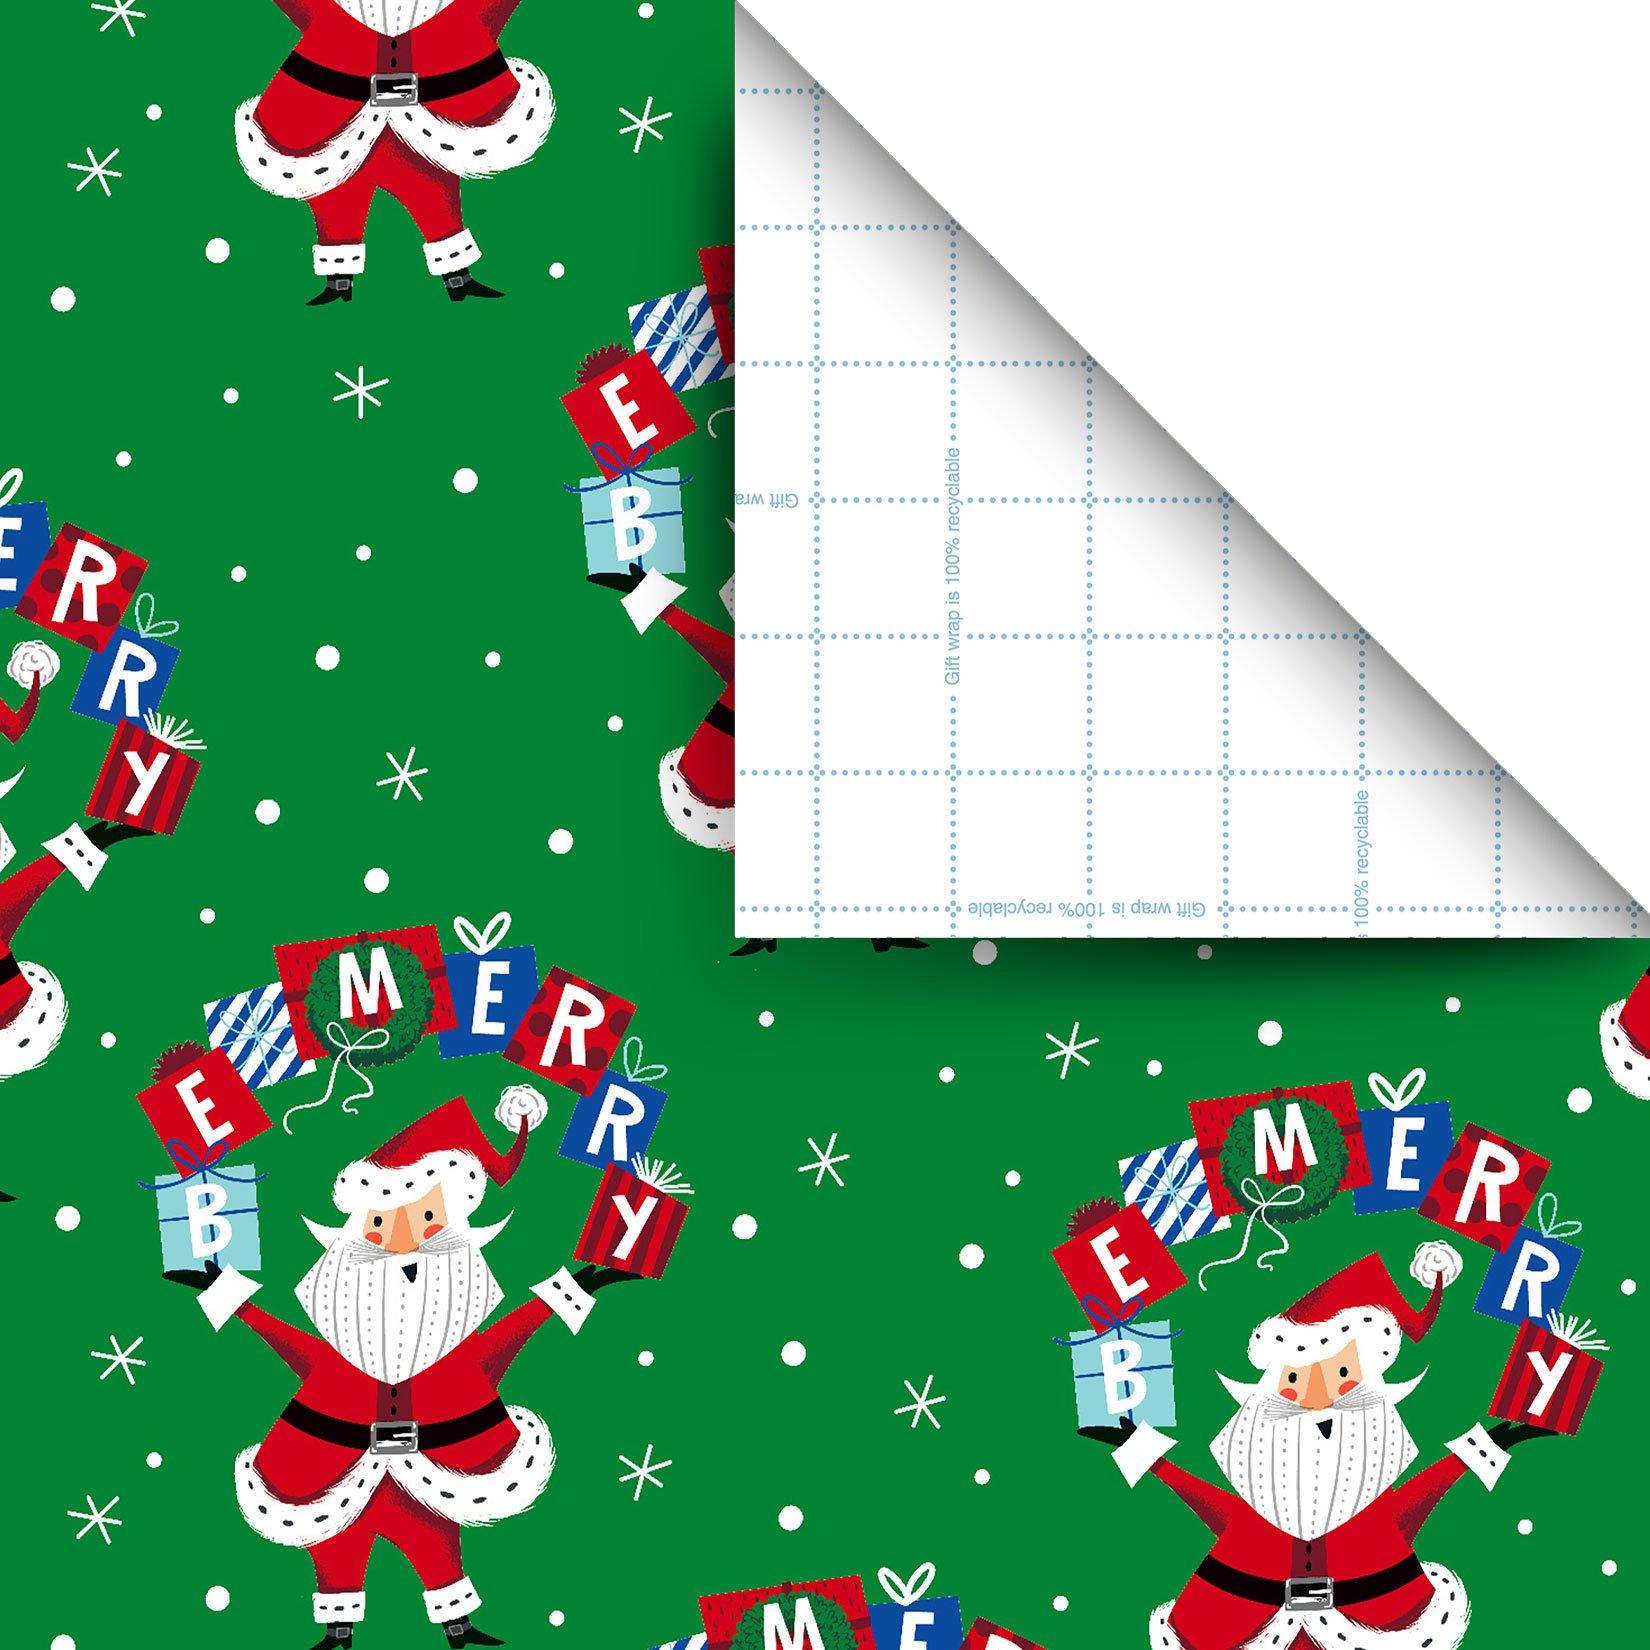 Birthday Gift Wrap Value Pack - Festive Wrapping Paper, 2 Giant